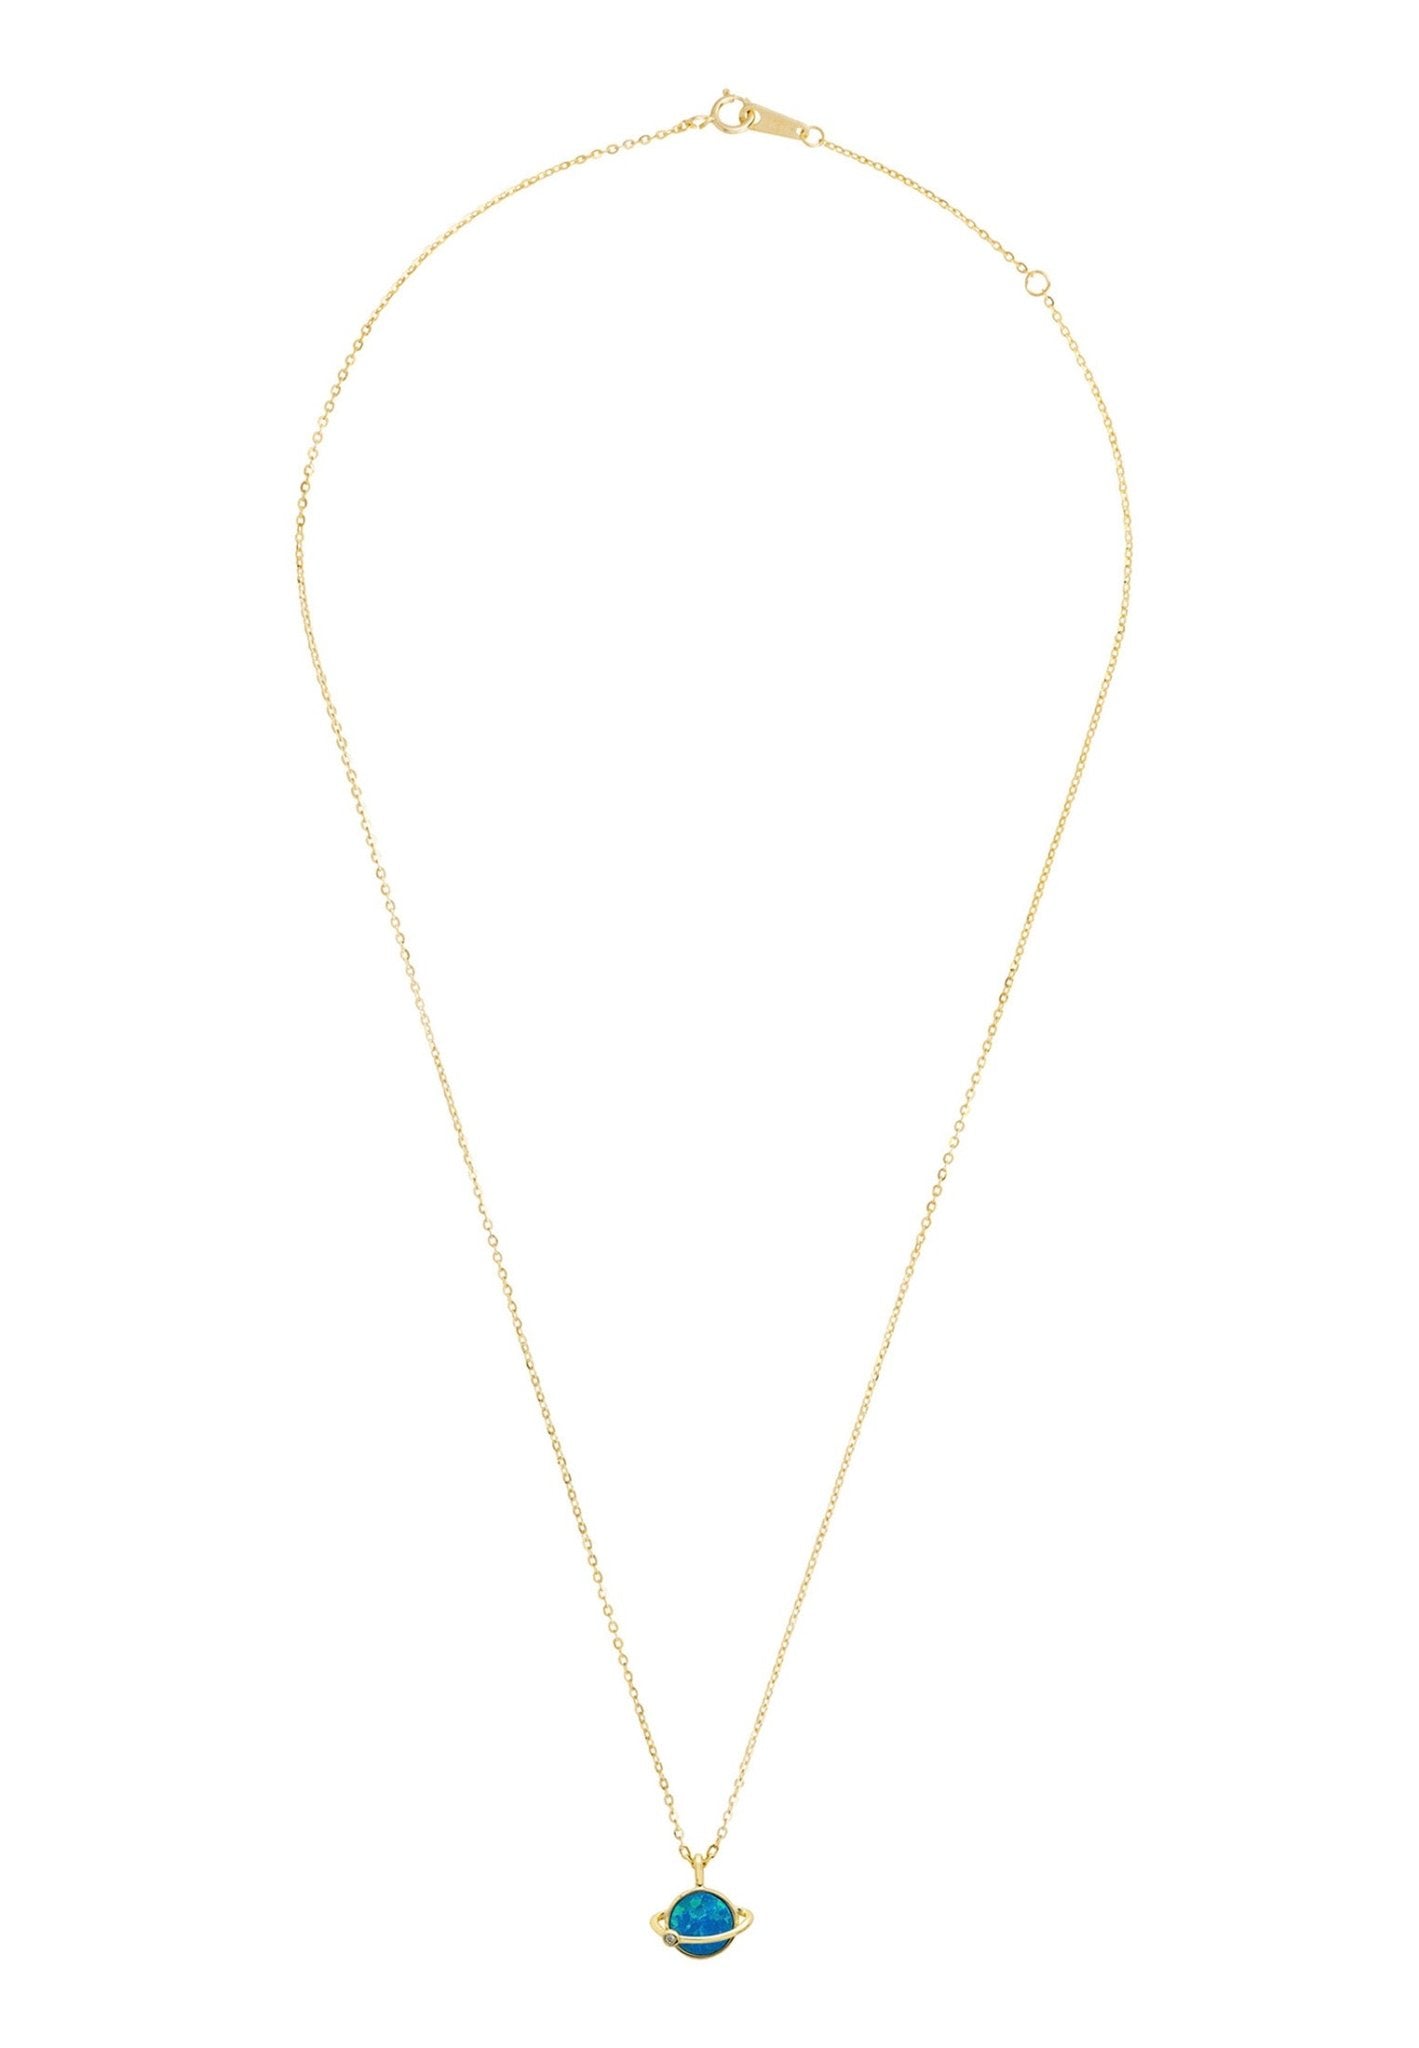 Saturn Galactic Opalite Necklace Gold - LATELITA Necklaces